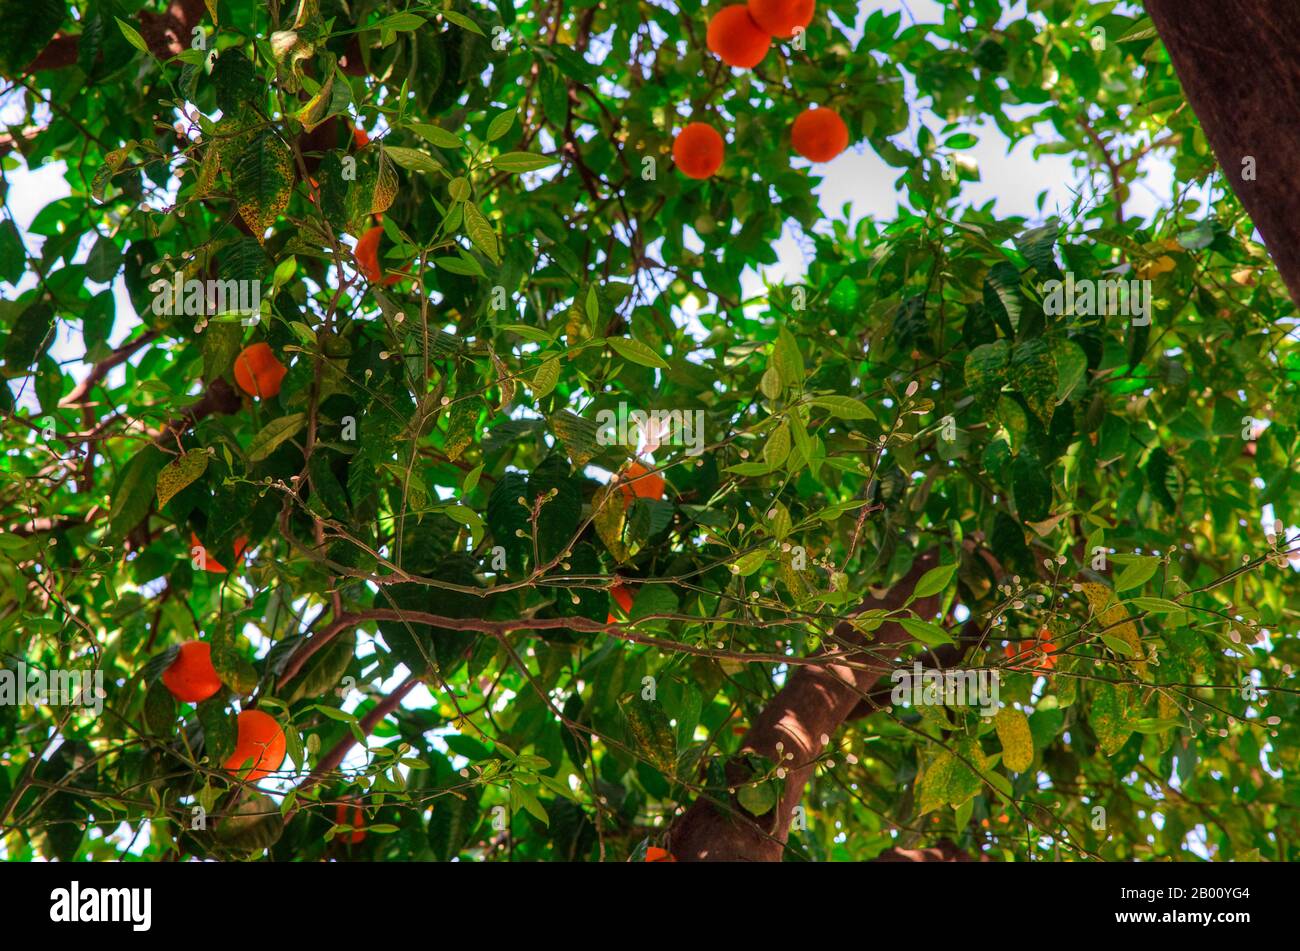 Blooming orange tree in Seville infected with HLB yellow dragon disease (citrus greening). Stock Photo